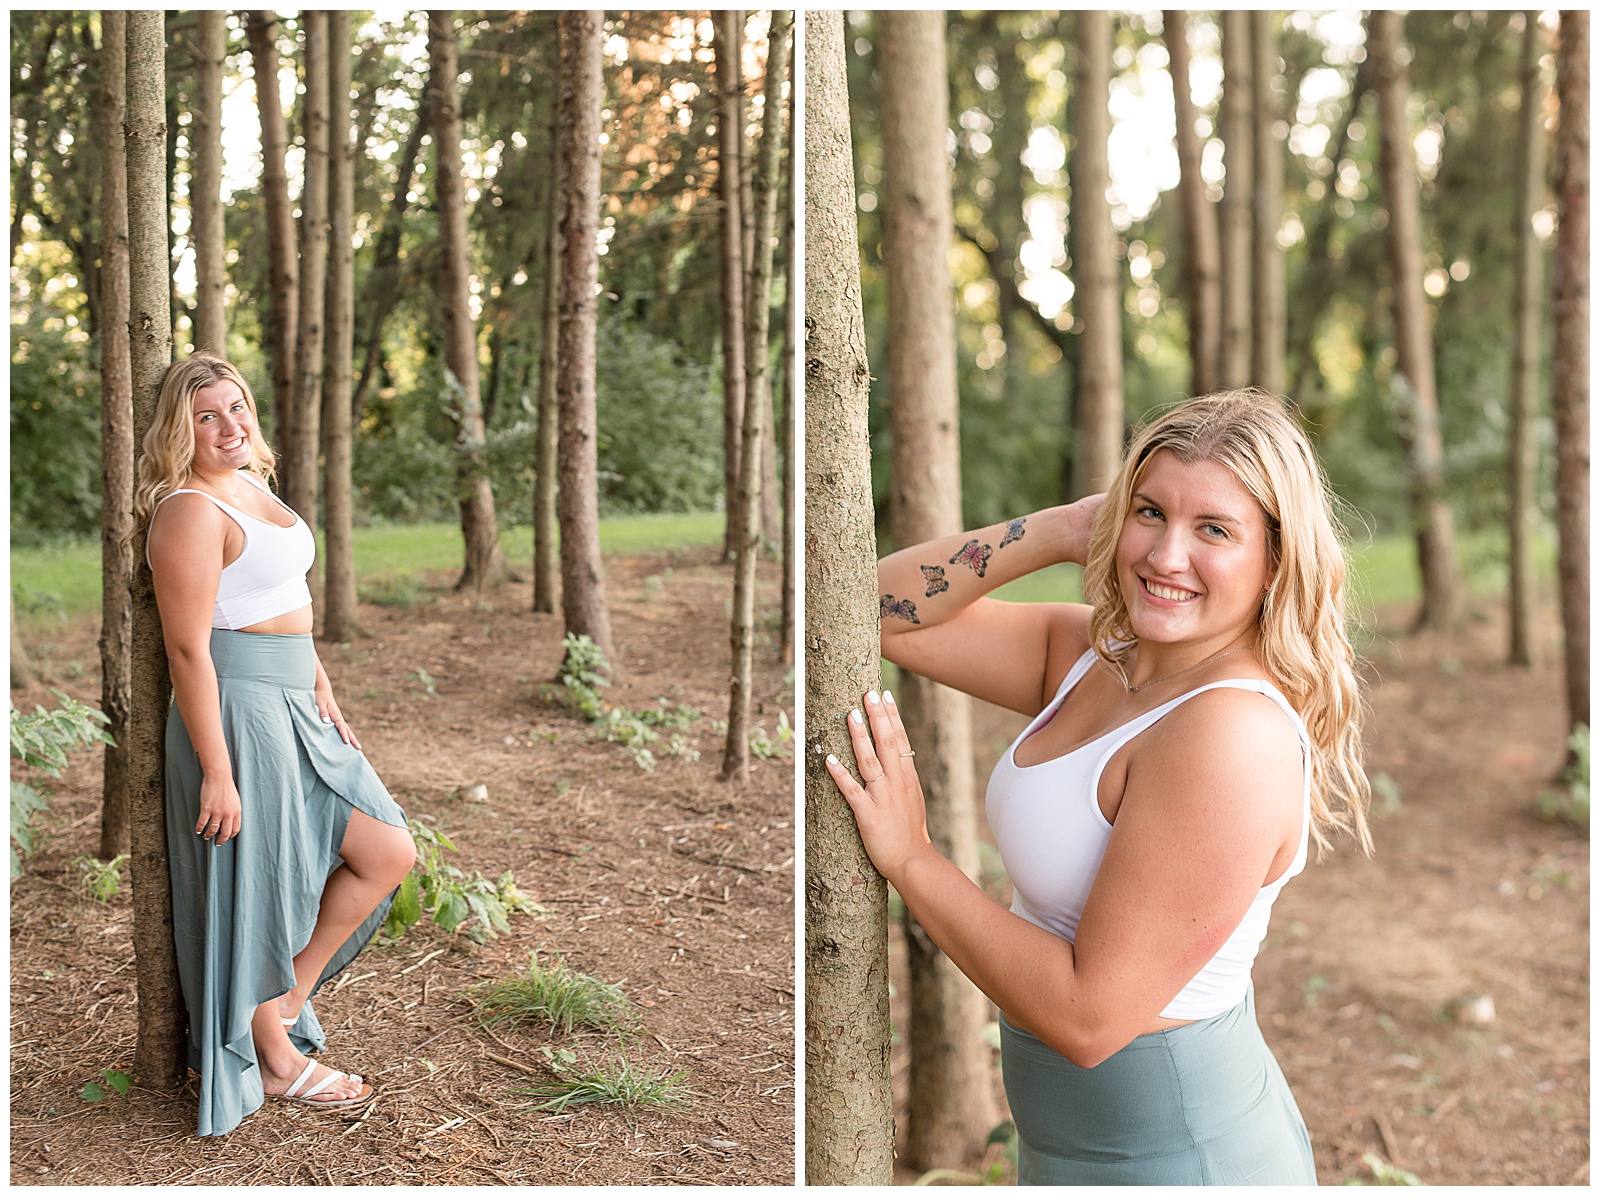 Senior session at Overlook Park at pine tree grove